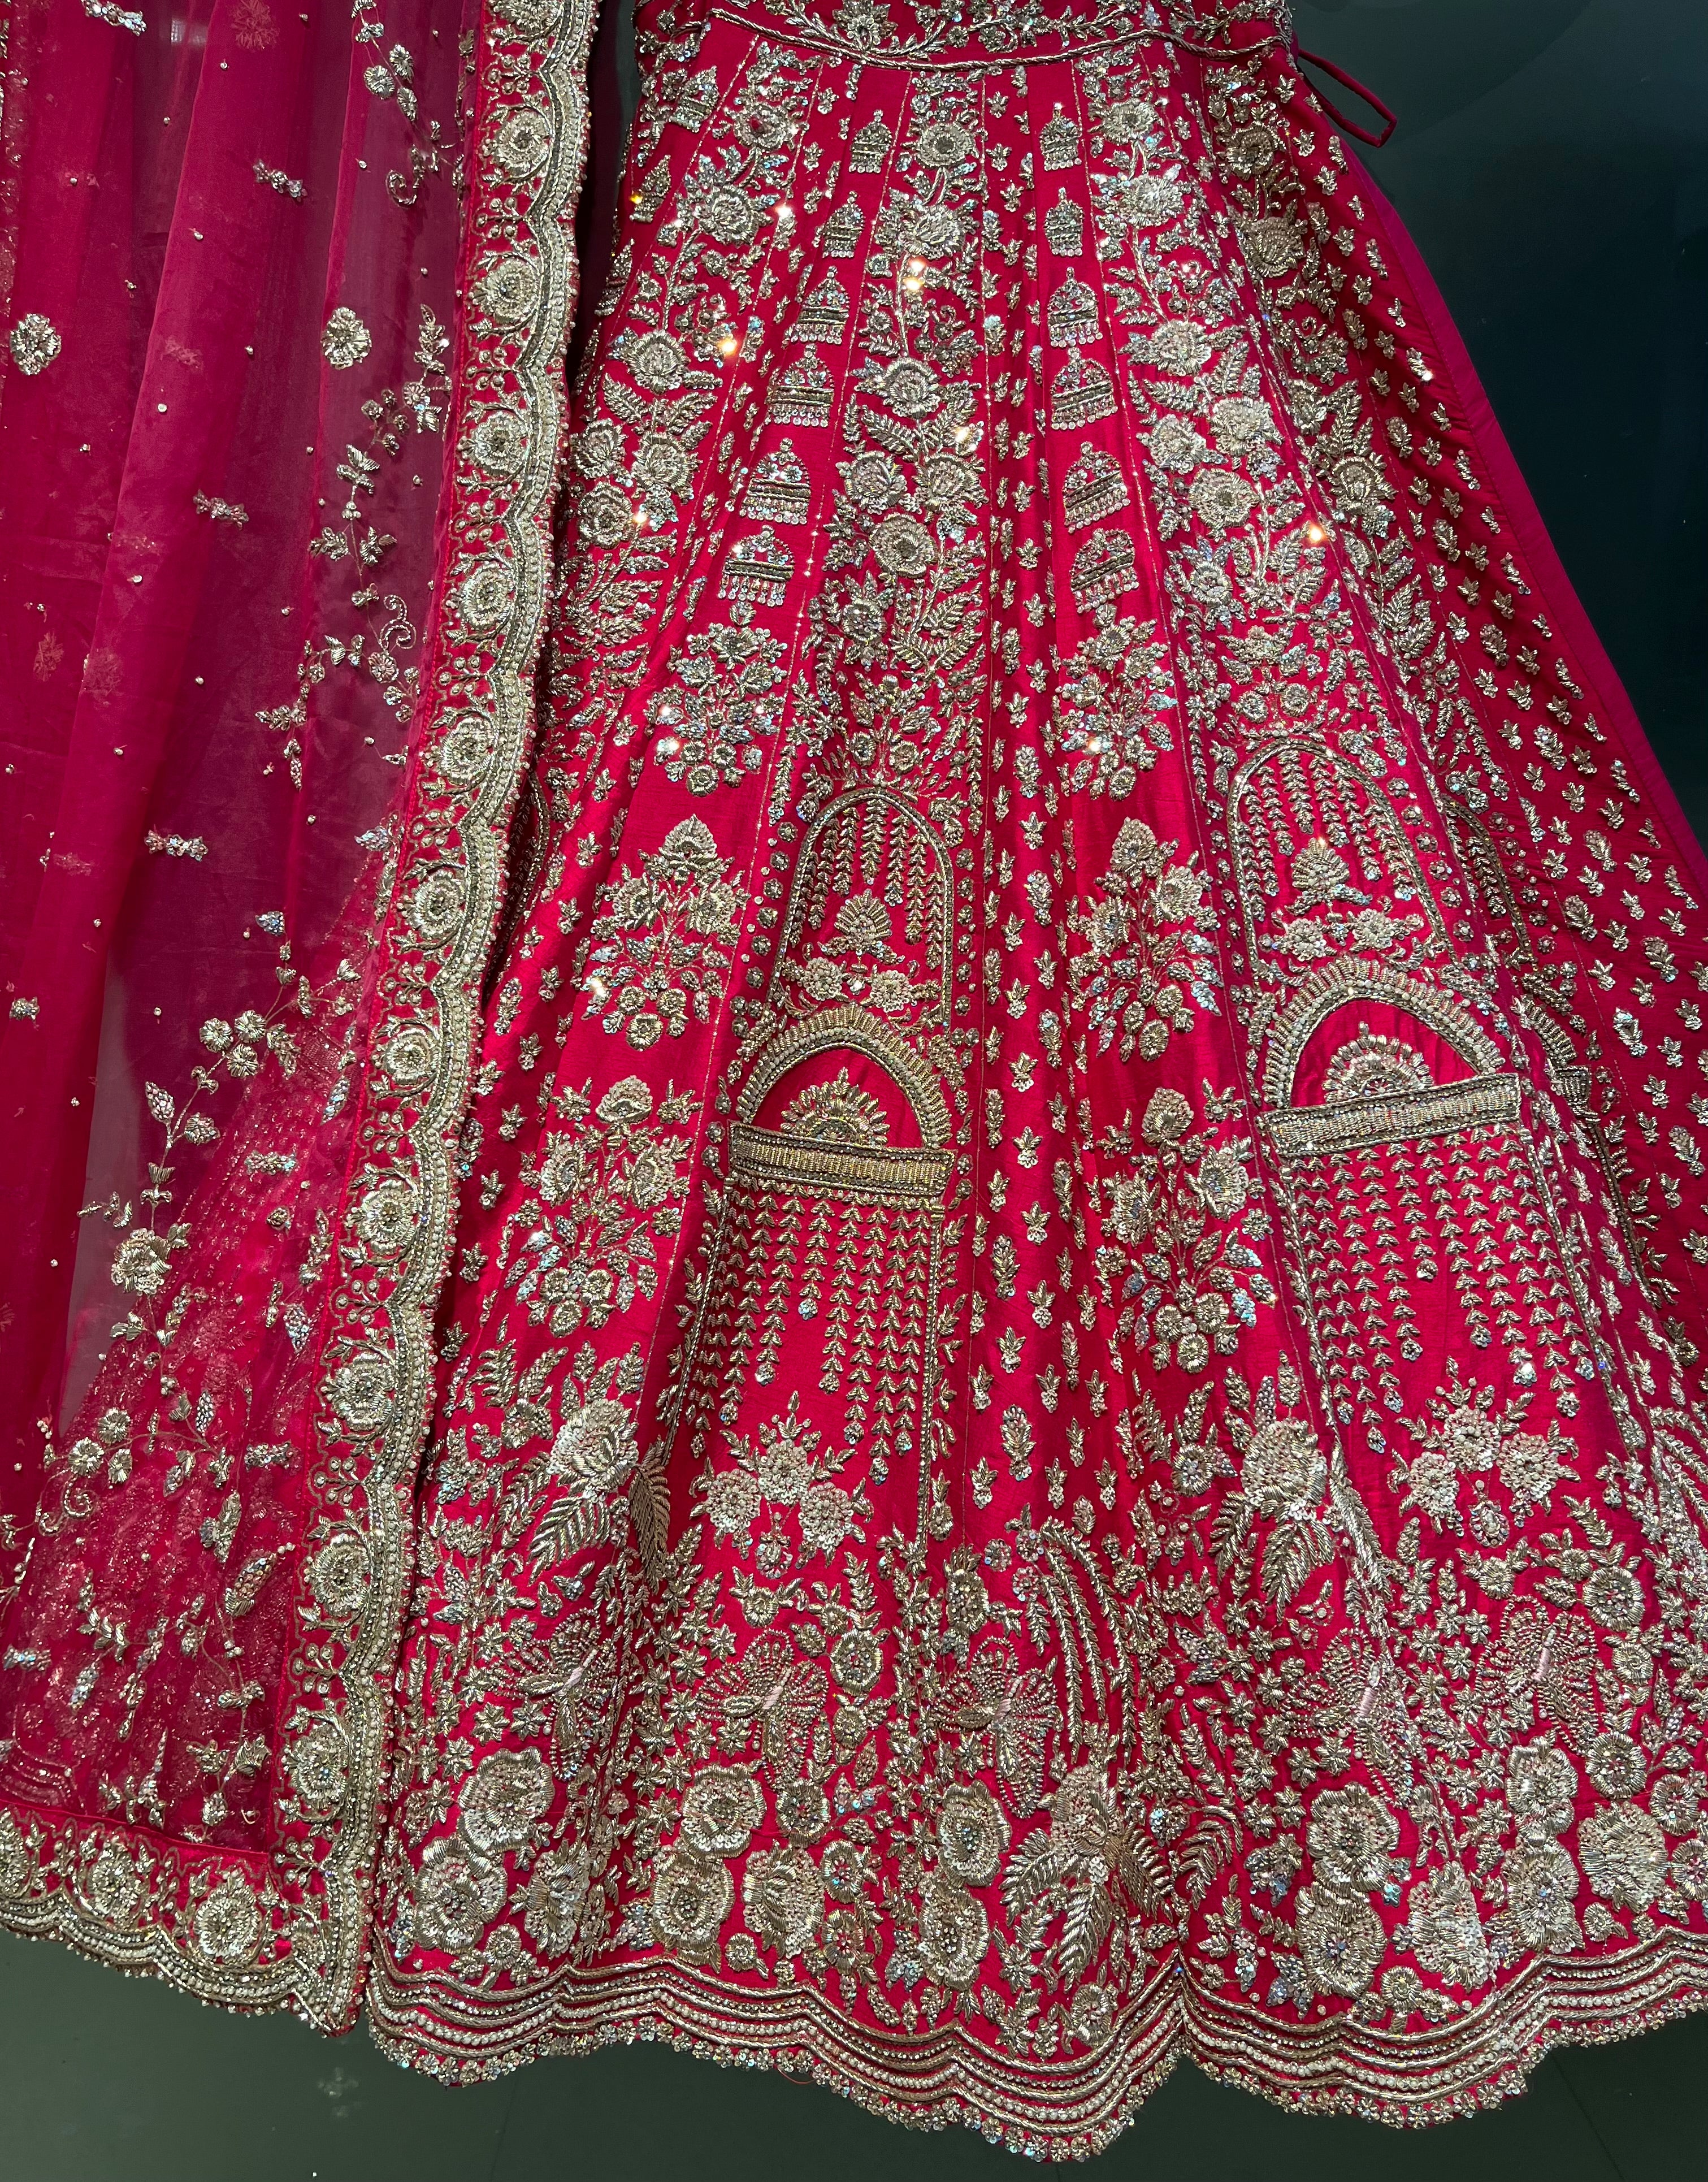 Exclusive Designer Pink Gharchola Saree in our Signature Design - Rana's by  Kshitija